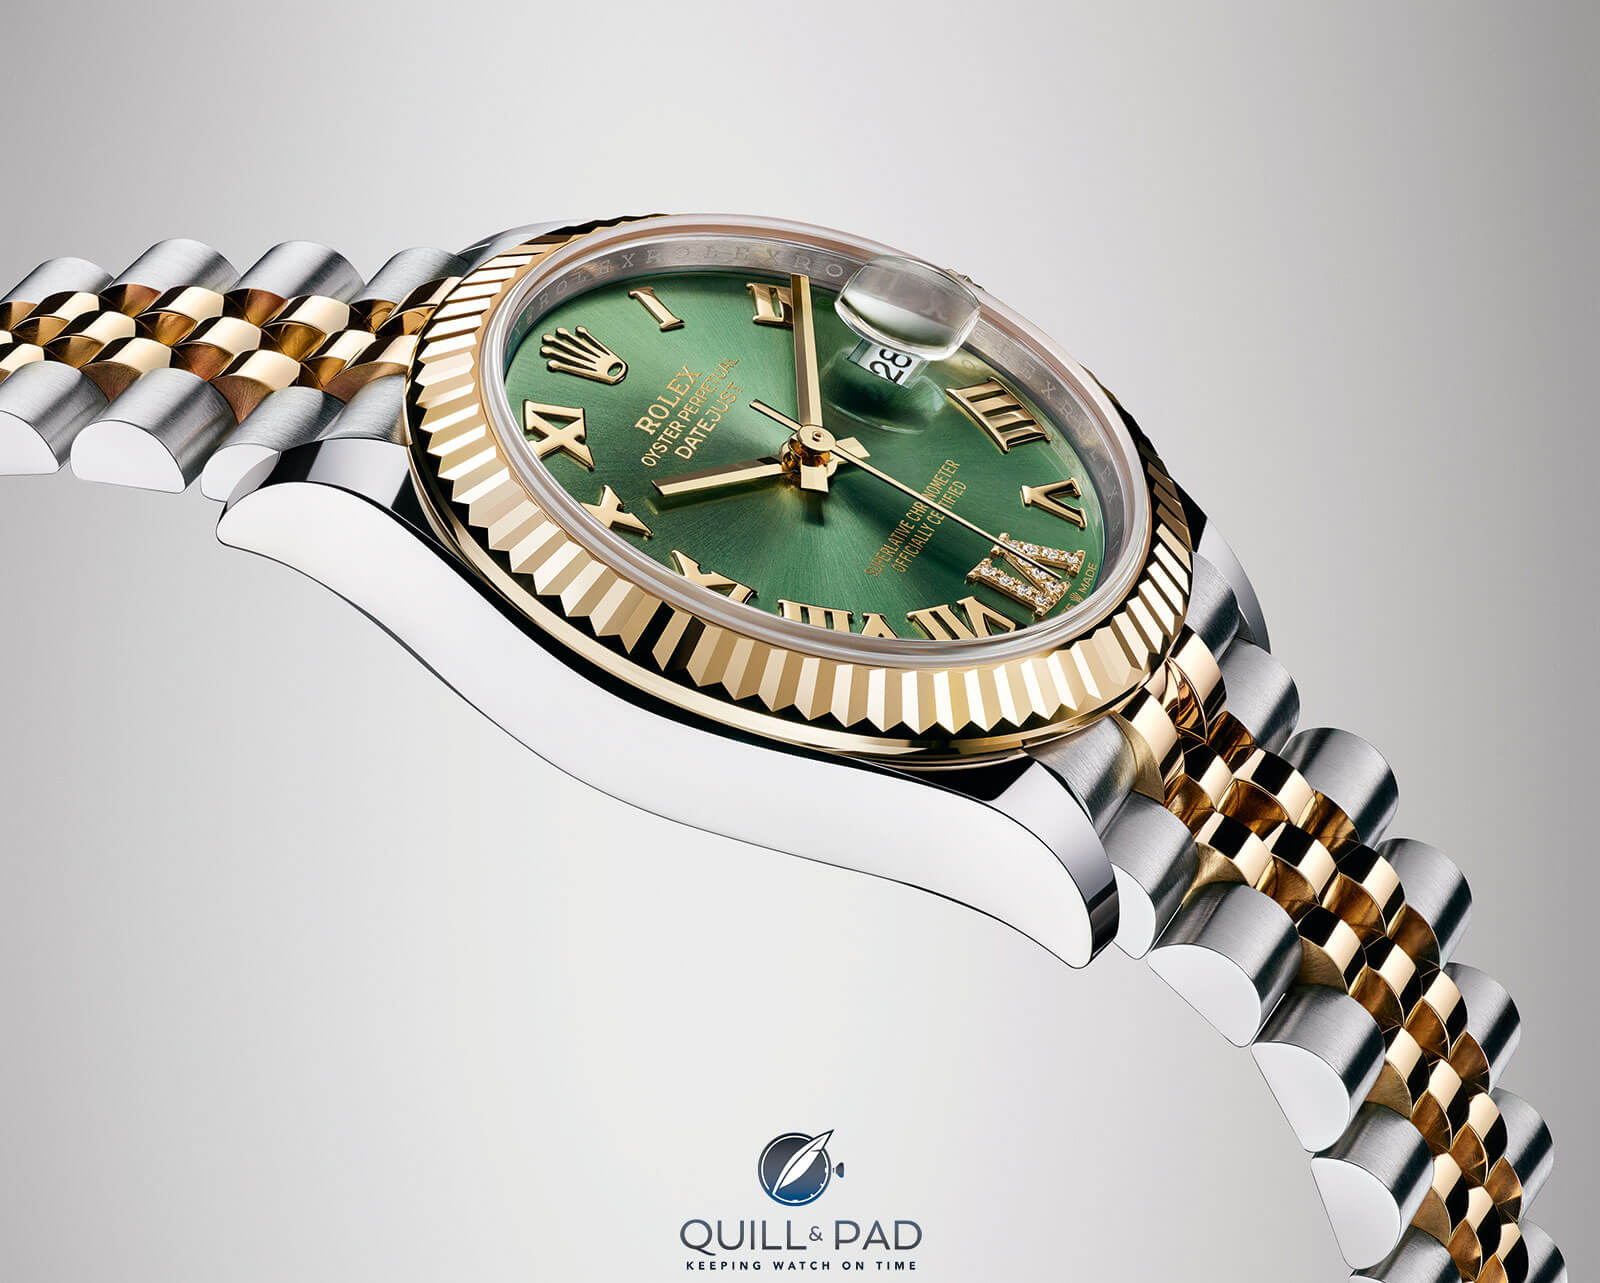 All 7 Of The Latest Rolex Models Of 2019, Plus Some Cool Variations Photofest!) - Quill & Pad